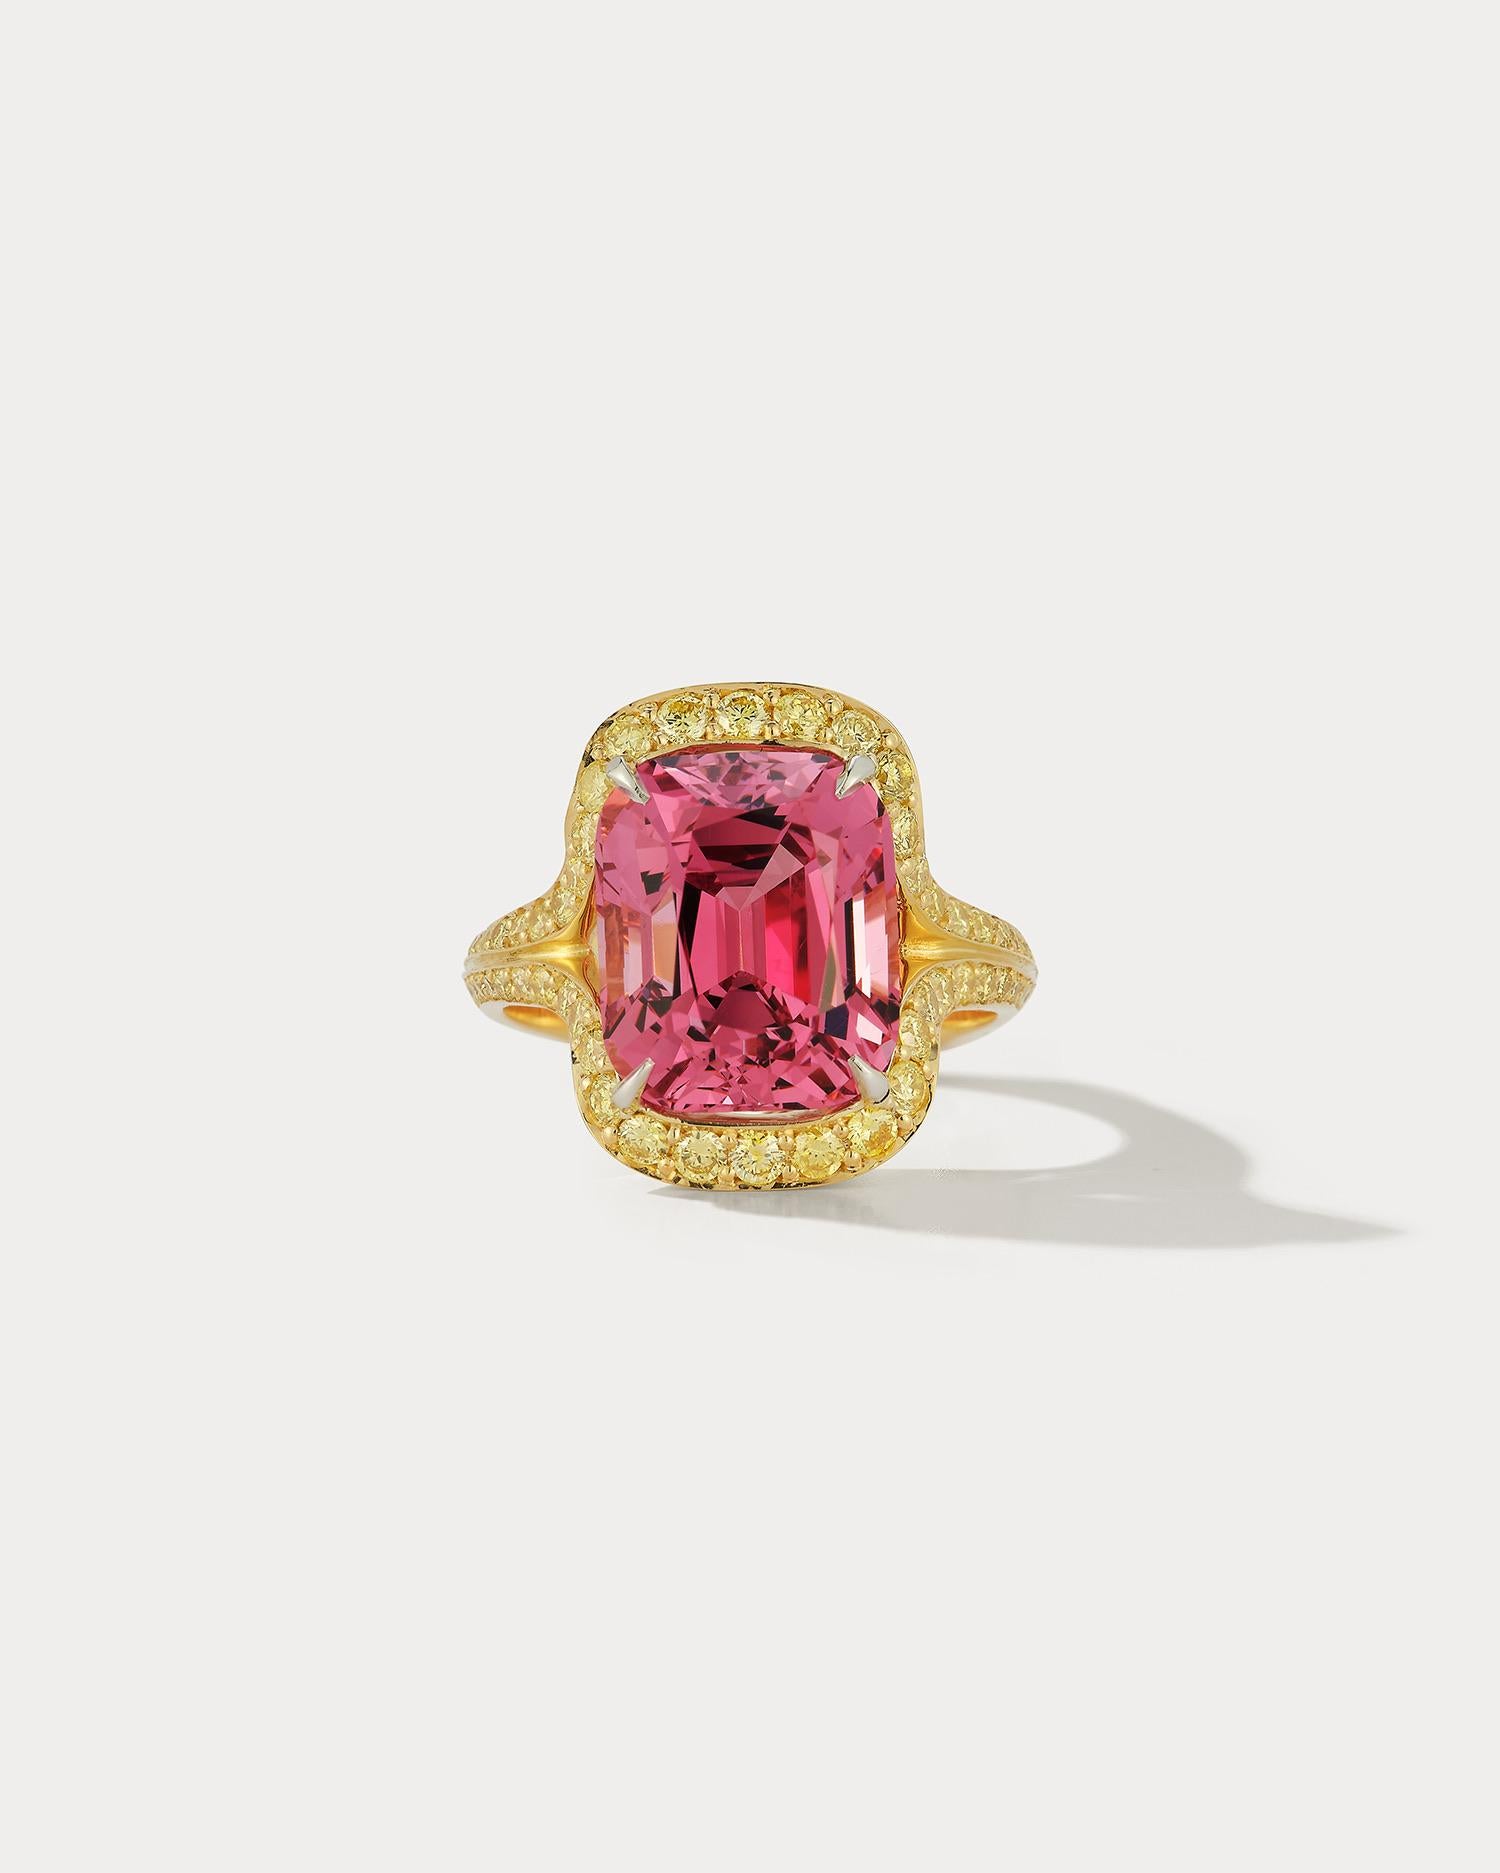 Introducing a breathtaking piece of jewelry: a 7.49 carat cushion cut peachy pink spinel surrounded by .94 carats of intense yellow diamonds, set in 18k yellow gold. The warm and vibrant combination of the pink spinel and yellow diamonds creates a